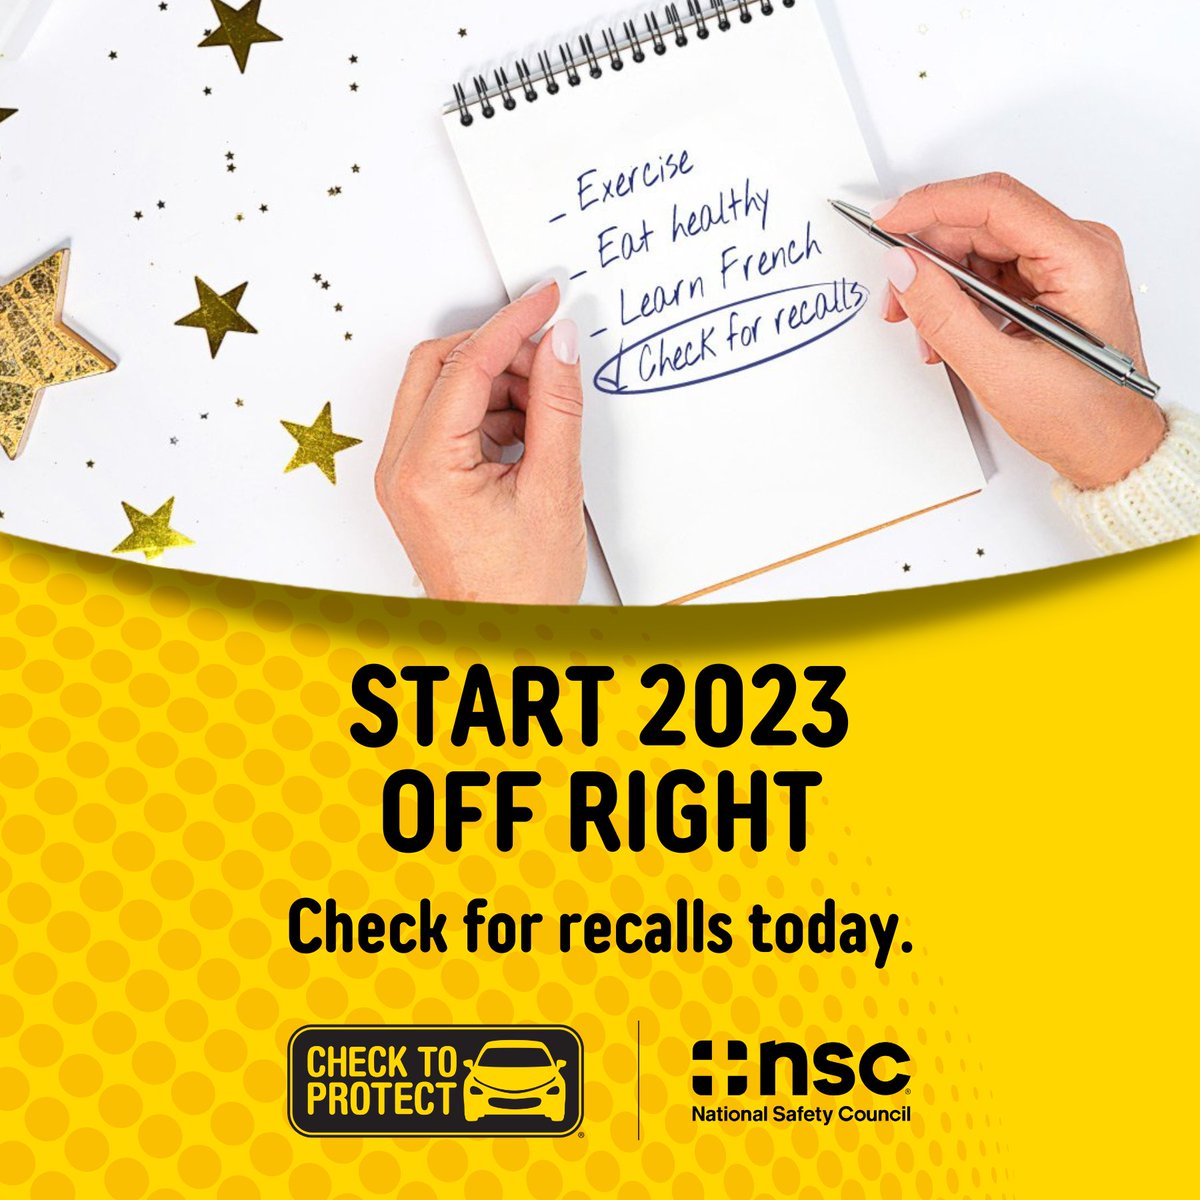 Start 2023 off right when you prioritize #RoadwaySafety. Make it your New Year’s resolution to #CheckForRecalls. The NSC #CheckToProtect initiative makes it easy for you to stay safe and check for safety recalls: bit.ly/NSCRecalls. #KeepEachOtherSafe #NewYear